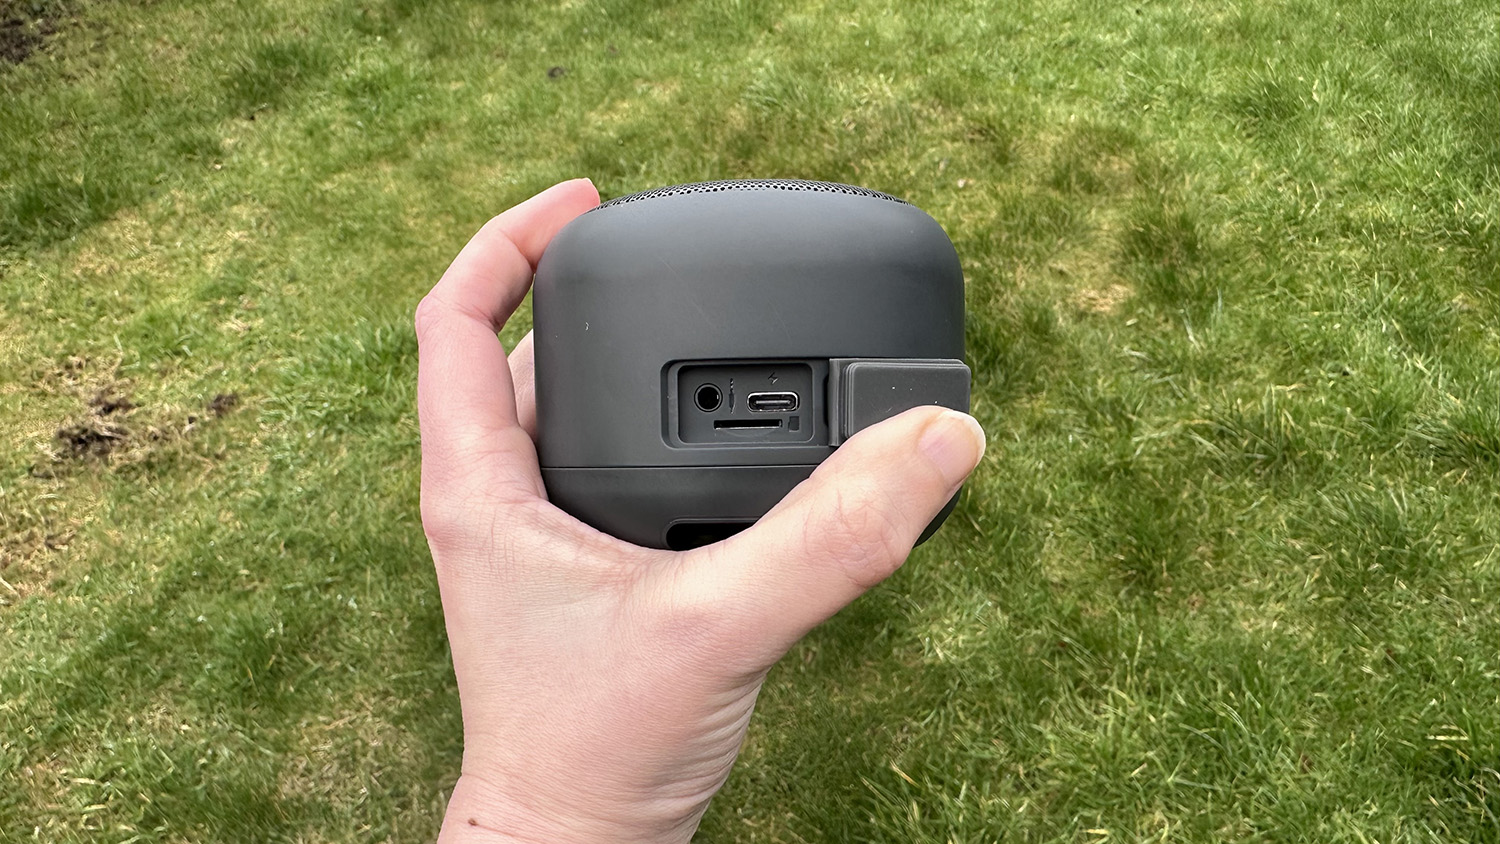 Someone holding the Nokia Portable Wireless Speaker 2 over grass and showing the ports on the rear of the speaker.